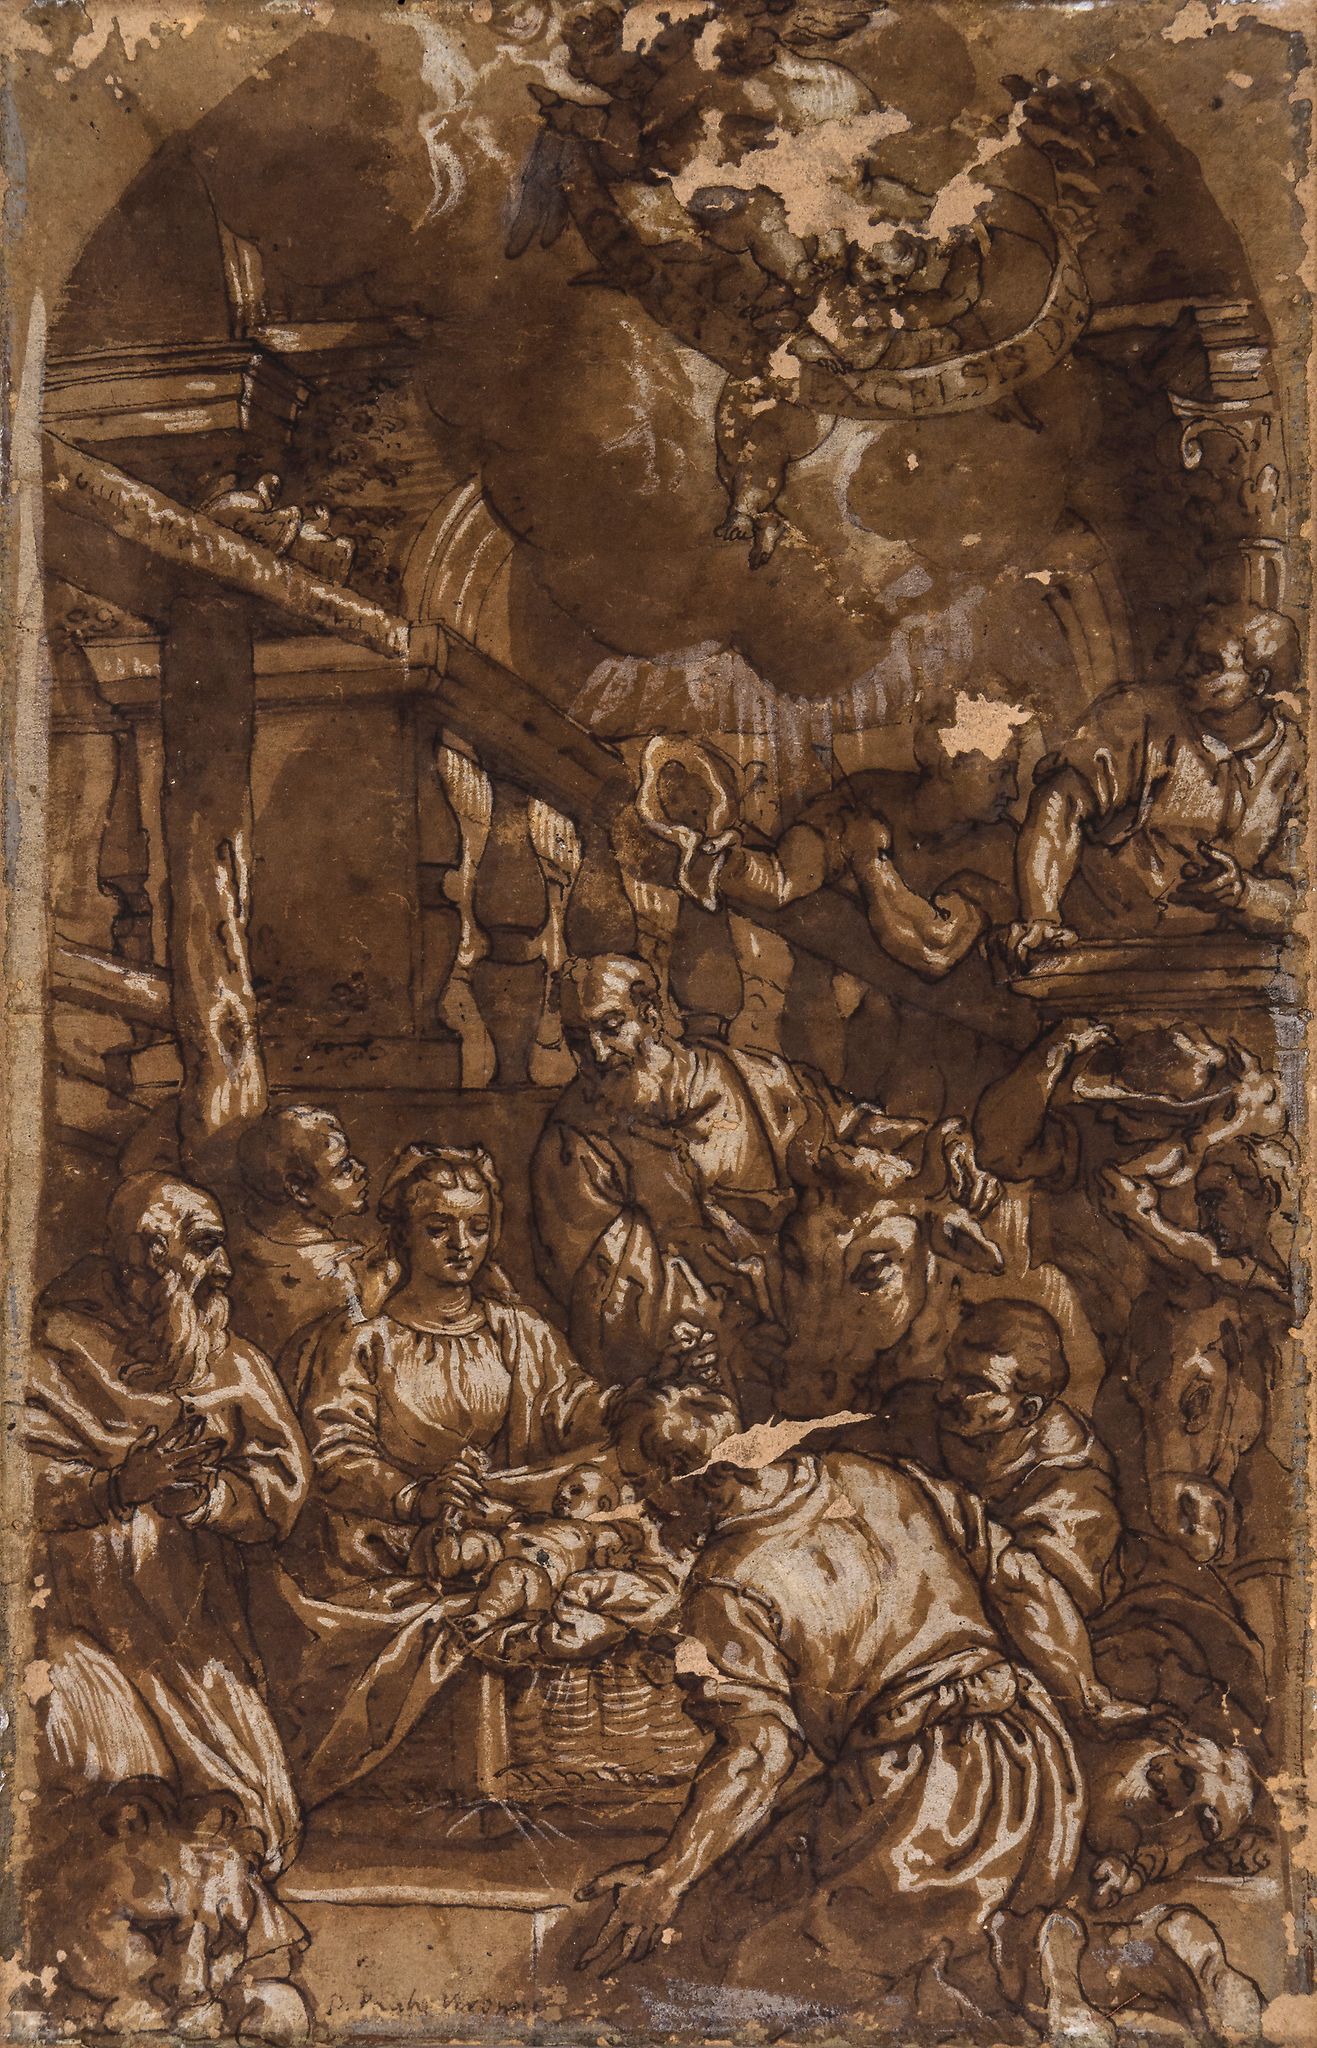 Follower of Paolo Veronese (1528-1588) - Adoration of the Shepherds, with St Jerome Pen and black